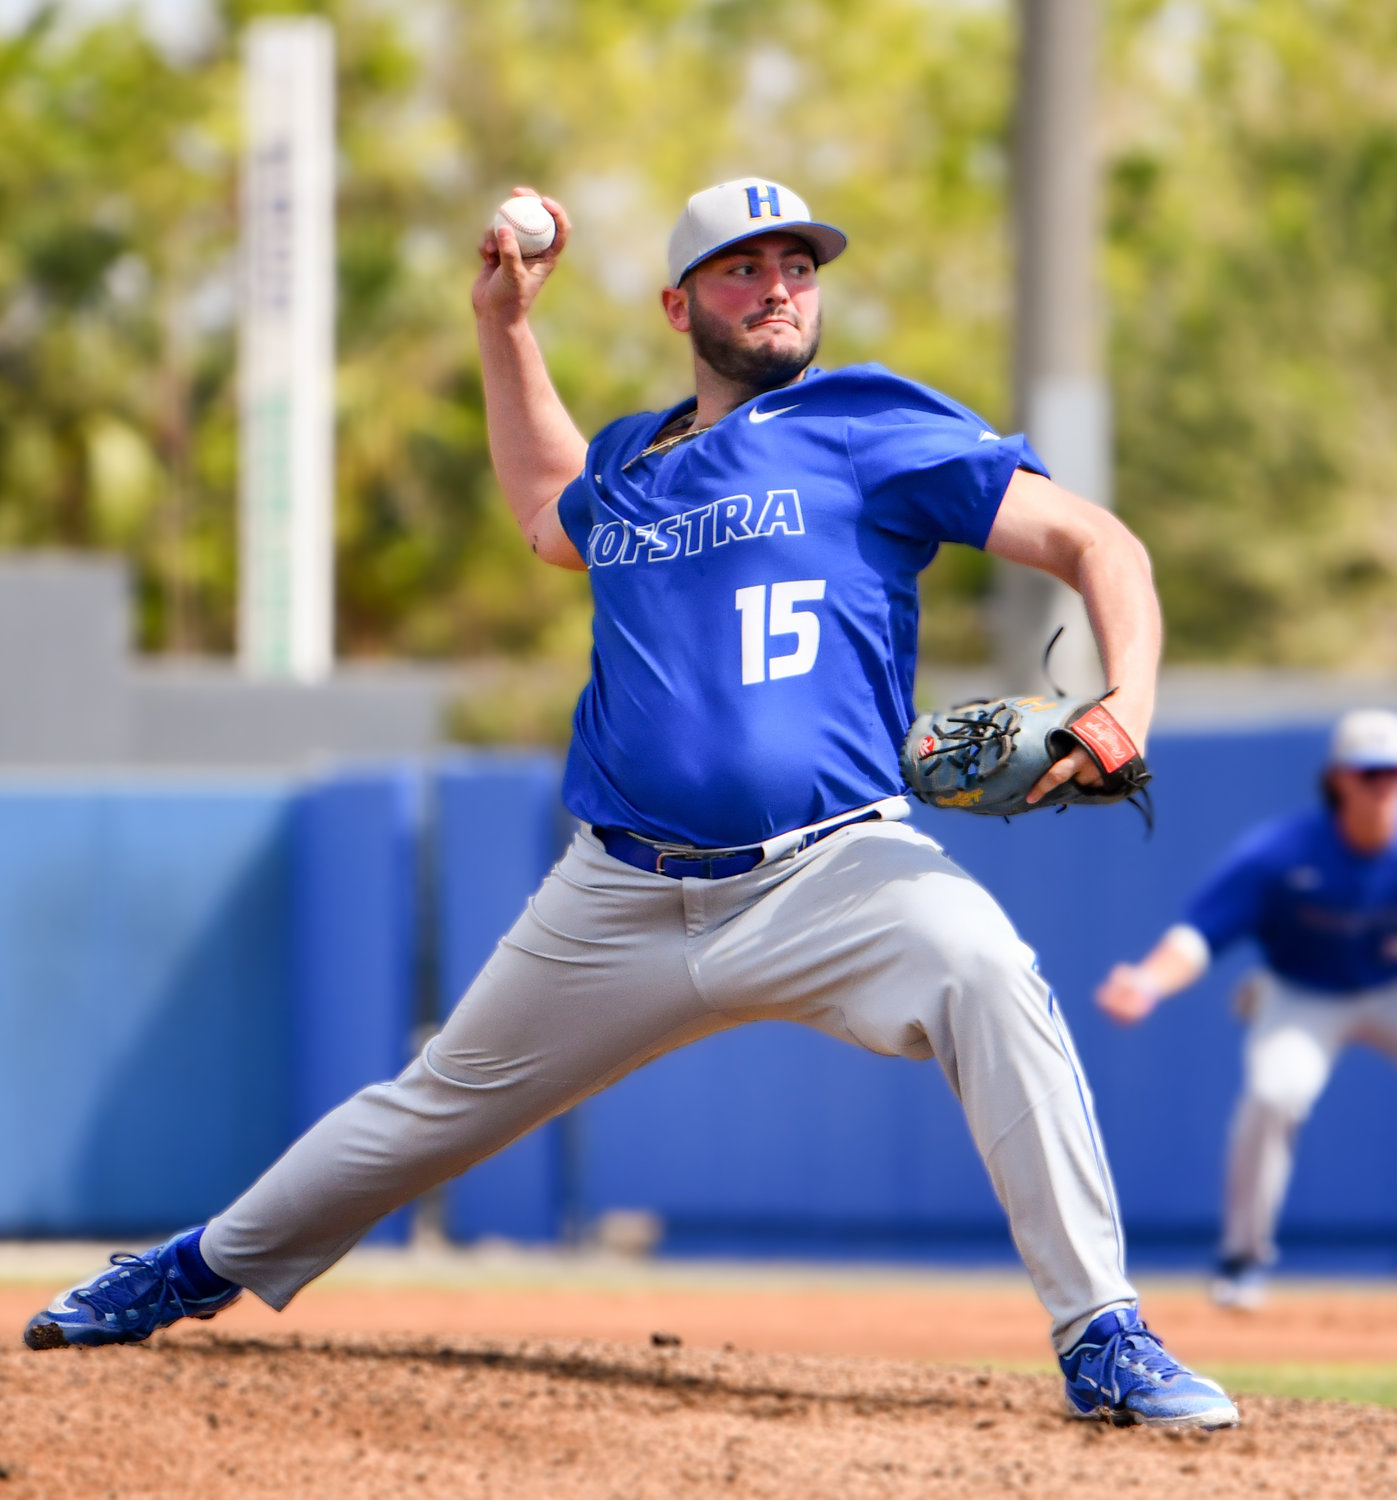 Grad student Brad Camarda is a reigning First-Team All-CAA pitcher who went 8-2 with 76 strikeouts last year.